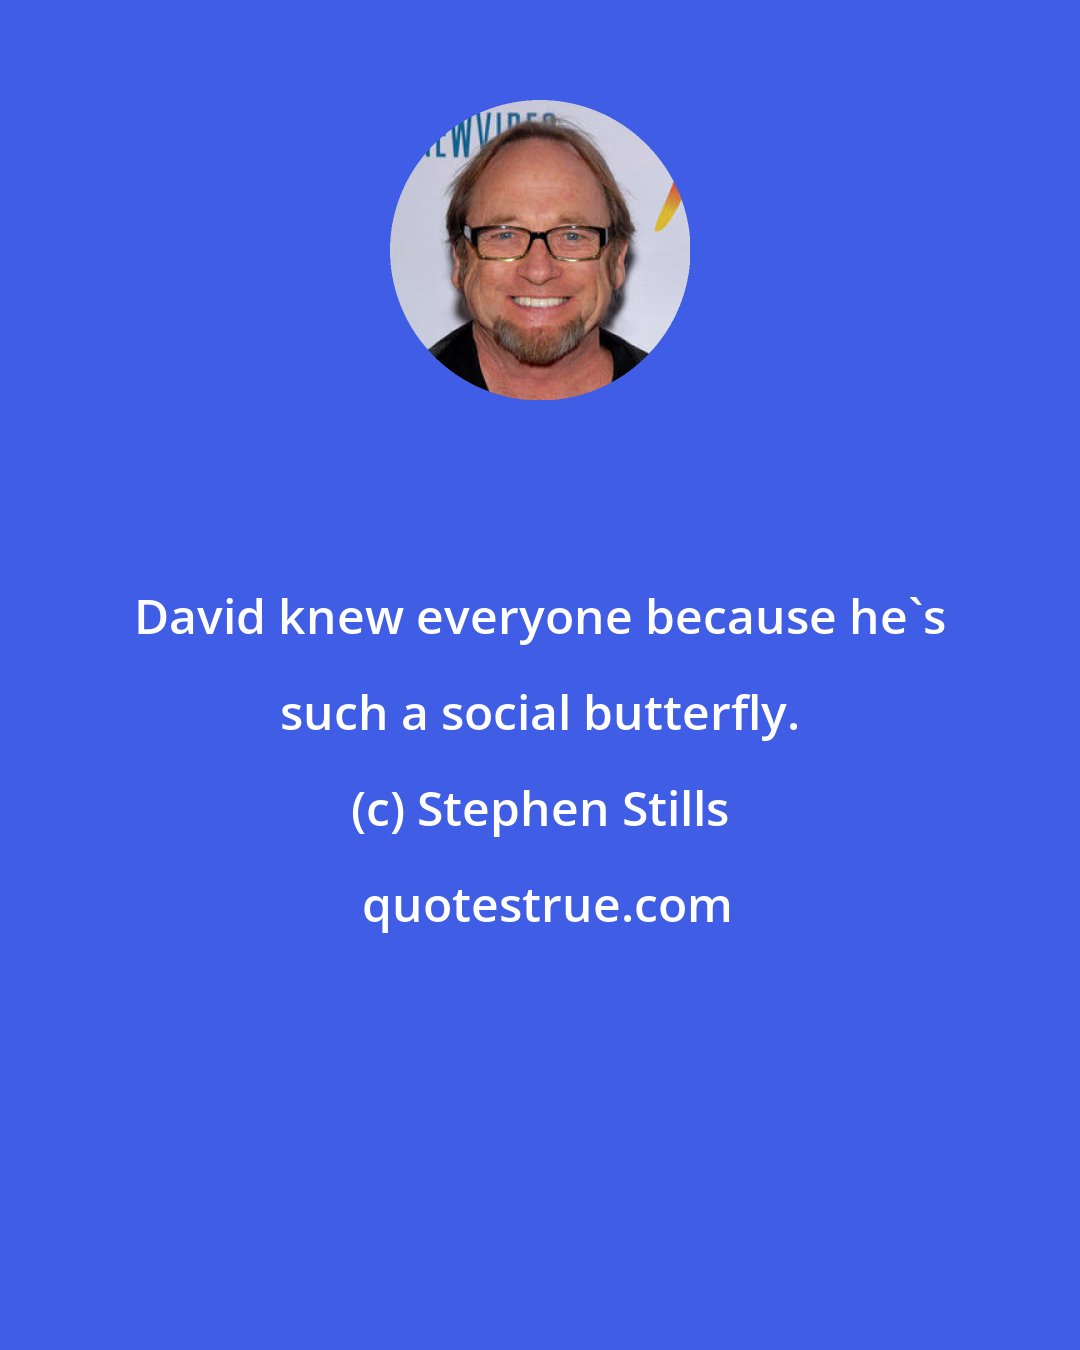 Stephen Stills: David knew everyone because he's such a social butterfly.